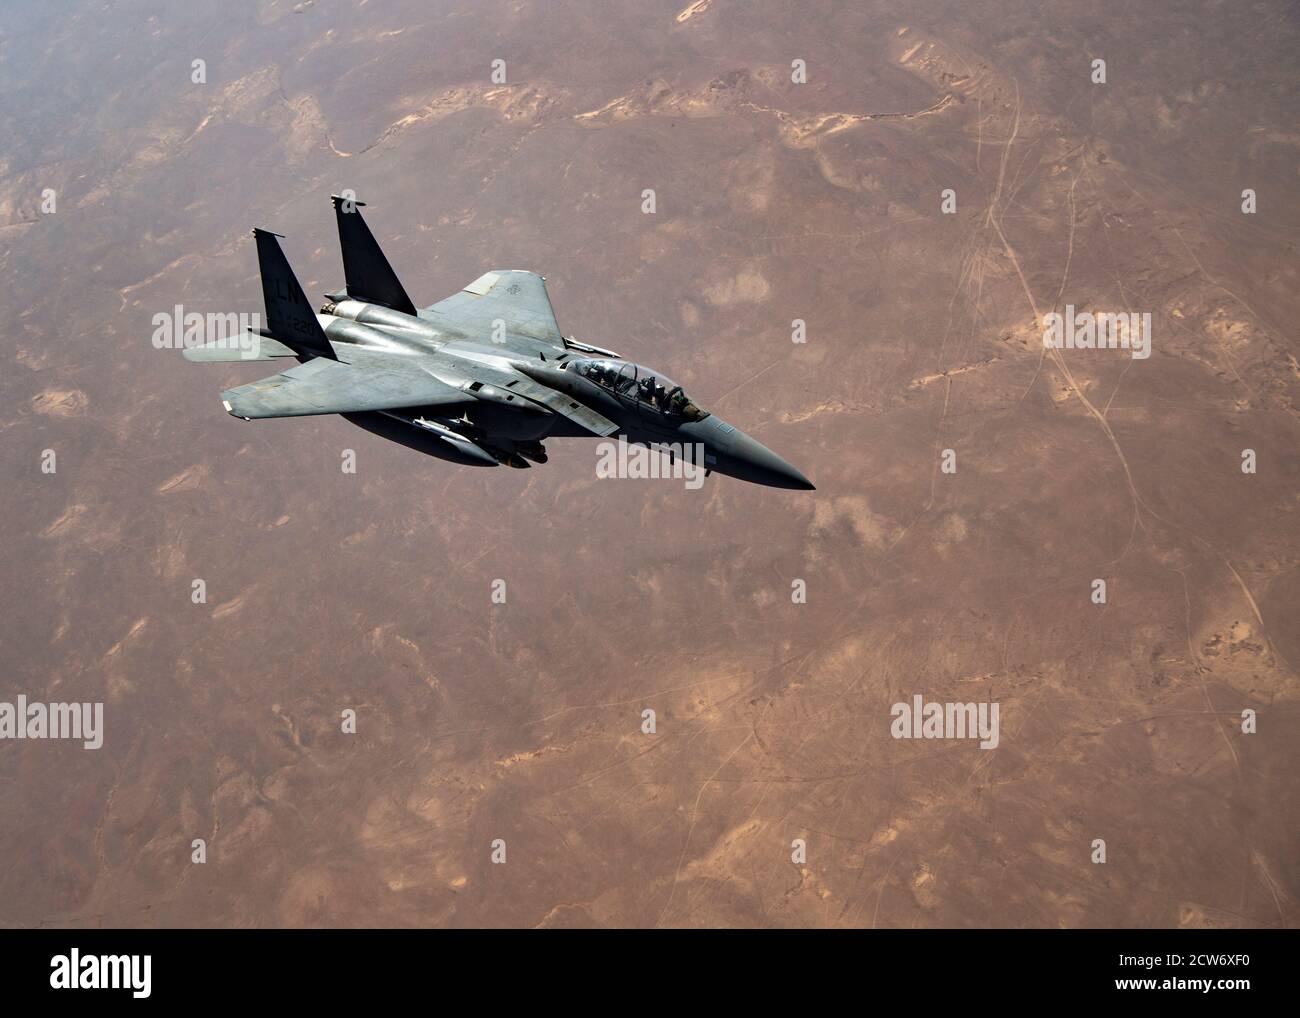 A U.S. Air Force F-15E Strike Eagle flies over the U.S. Central Command area of responsibility, Aug. 31, 2020.  The F-15E Strike Eagle is a dual-role fighter designed to perform air-to-air and air-to-ground missions, demonstrating U.S. Air Force Central Commands' posture to deter regional aggressors.  (U.S. Air Force photo by Senior Airman Duncan C. Bevan) Stock Photo